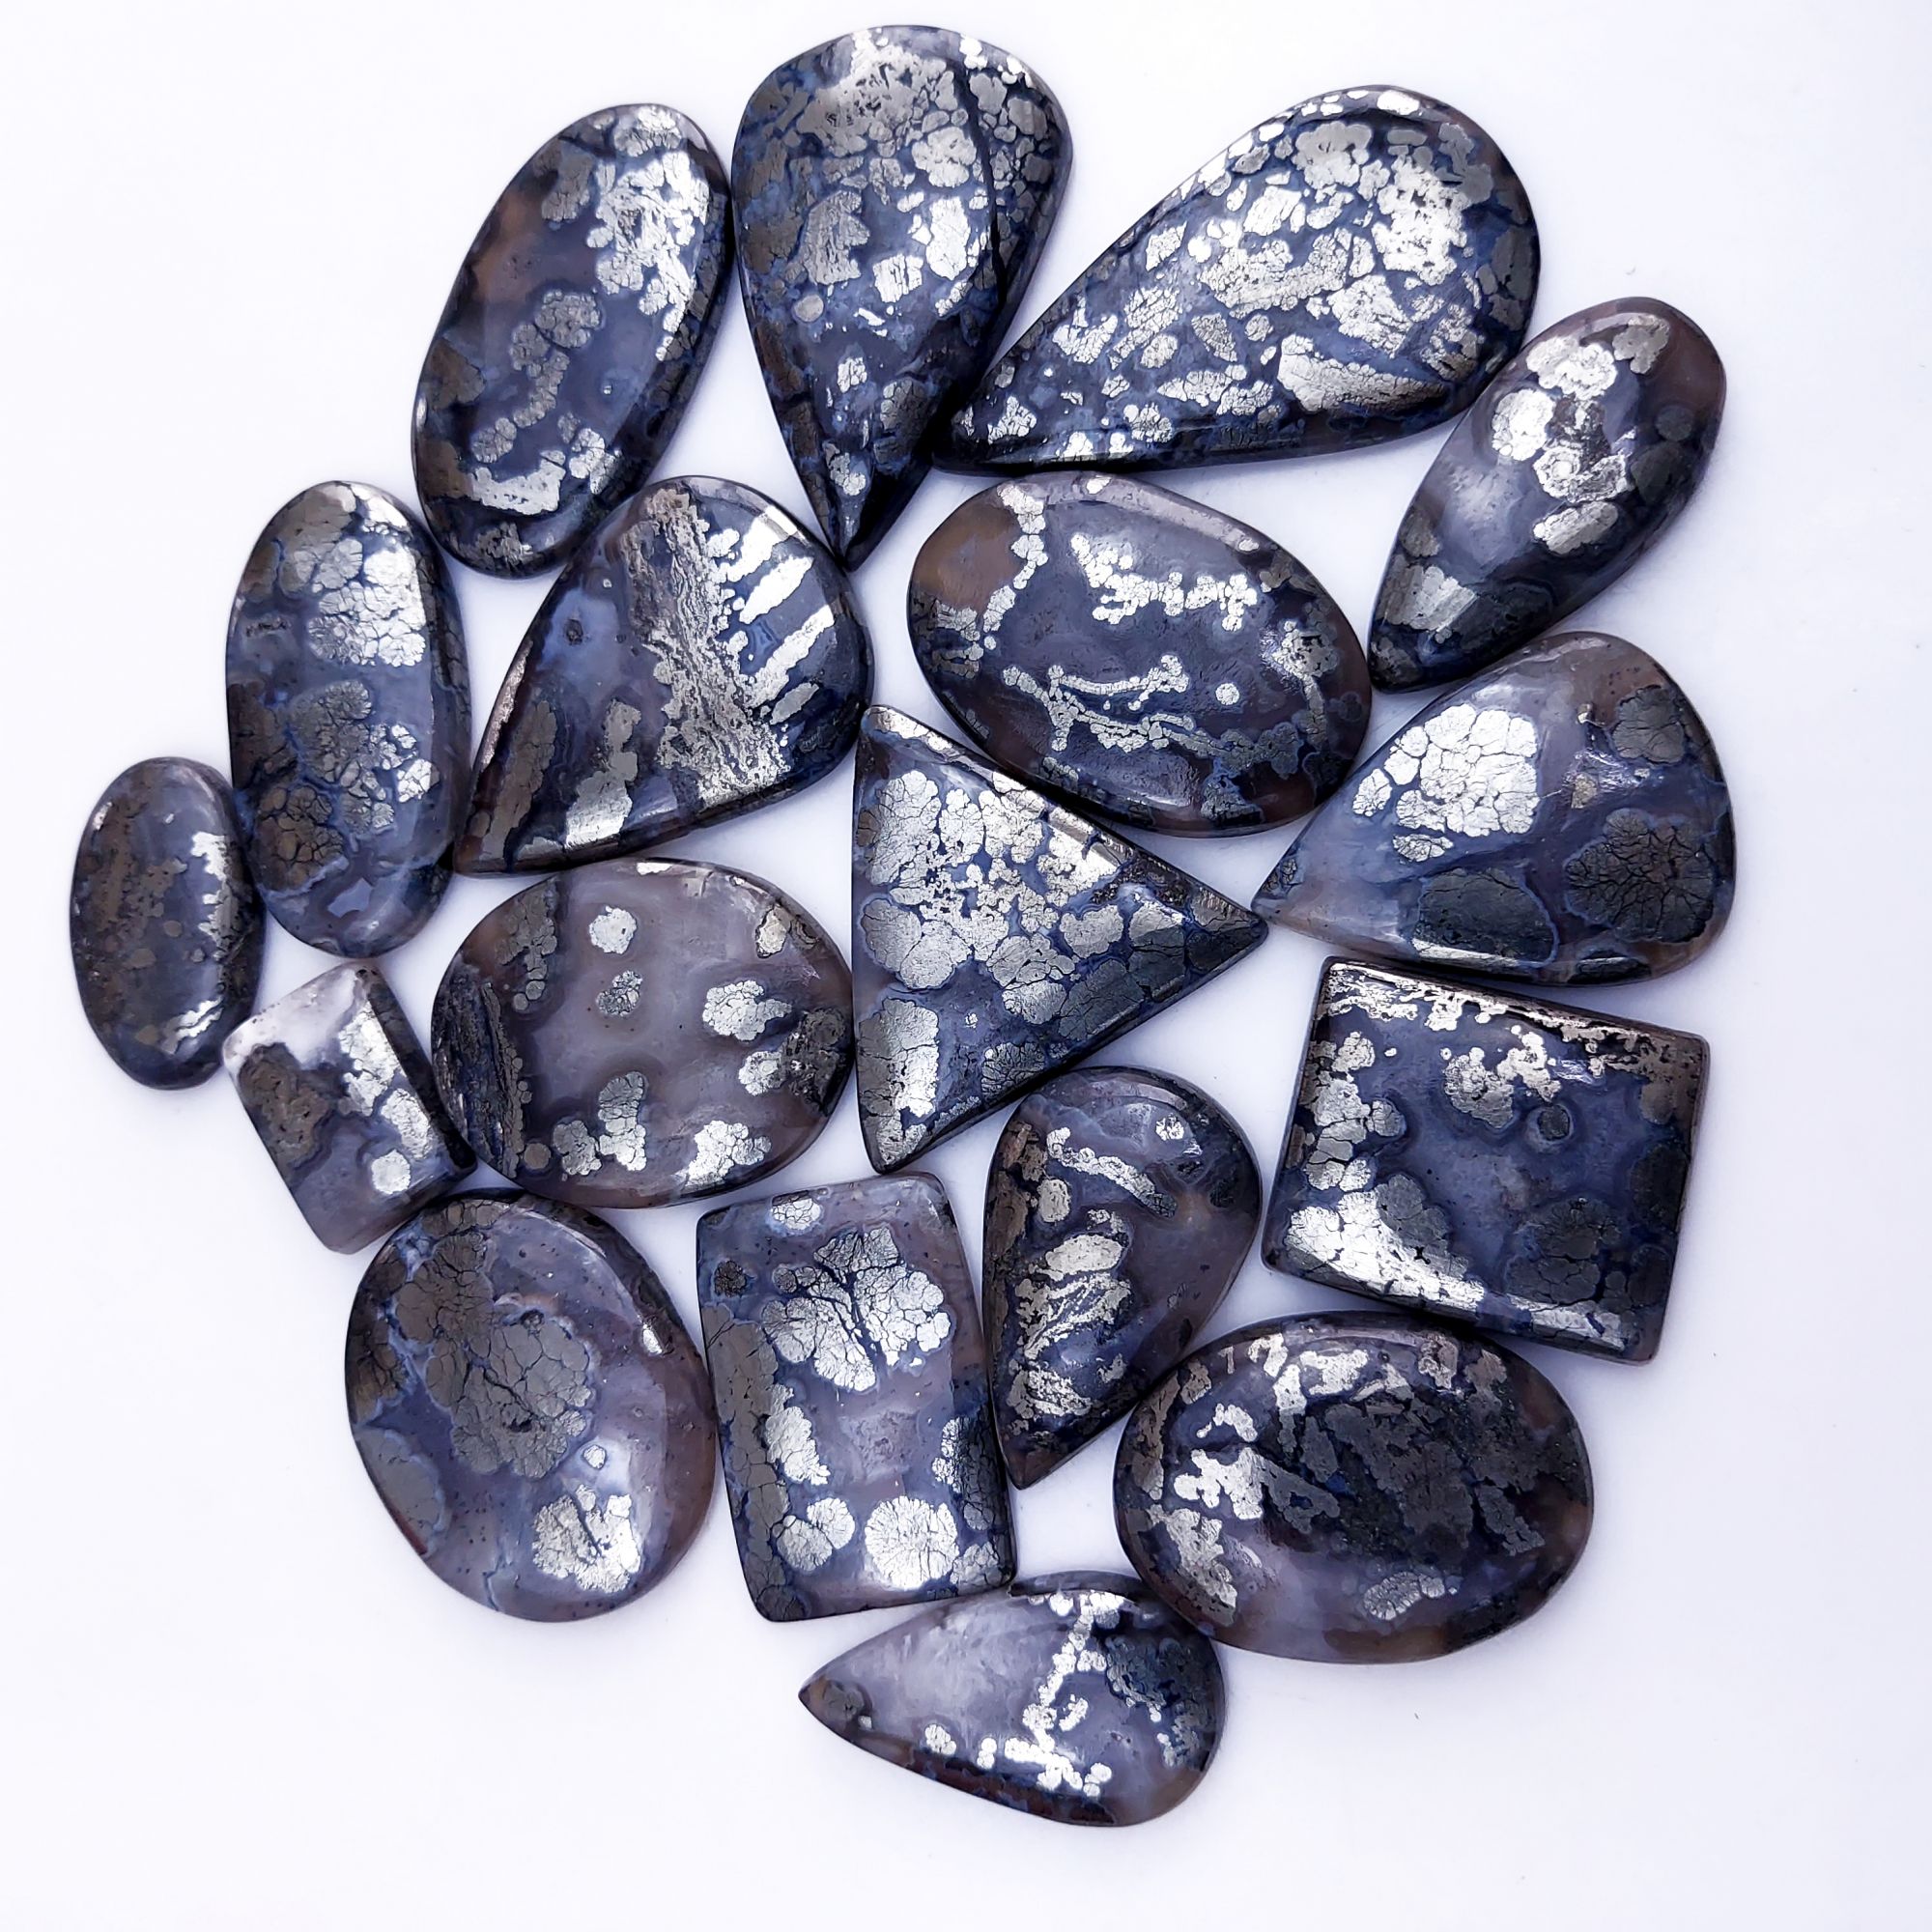 18Pcs 712Cts Natural Marcasite Grey Cabochon Back Side Unpolished Gemstone Semi-Precious Gemstones For Jewelry Making 45x25 20x14mm #10033